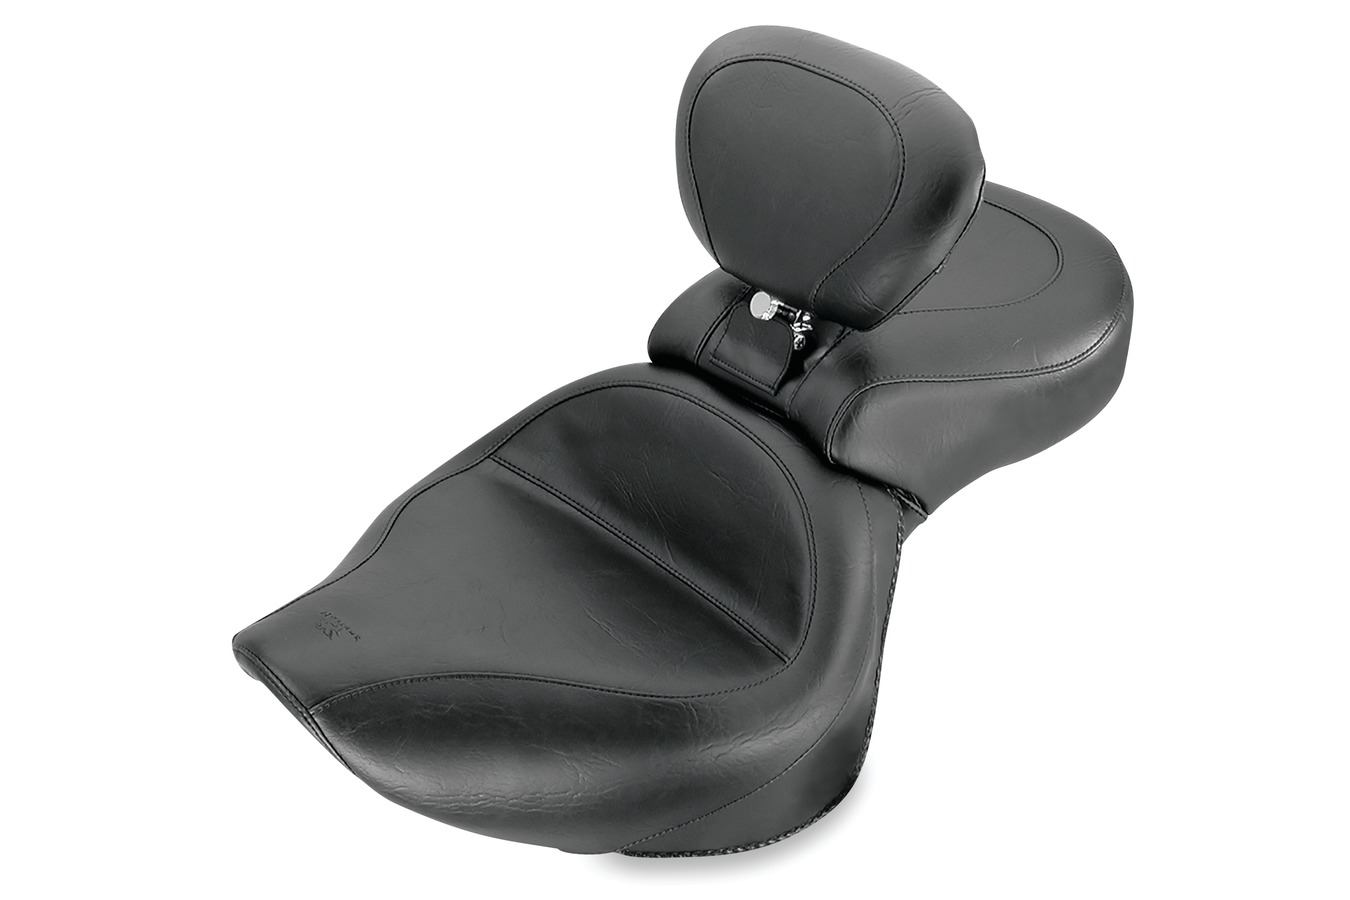 Wide Touring One-Piece Seat with Driver Backrest for Honda VT750DC Spirit 2001-